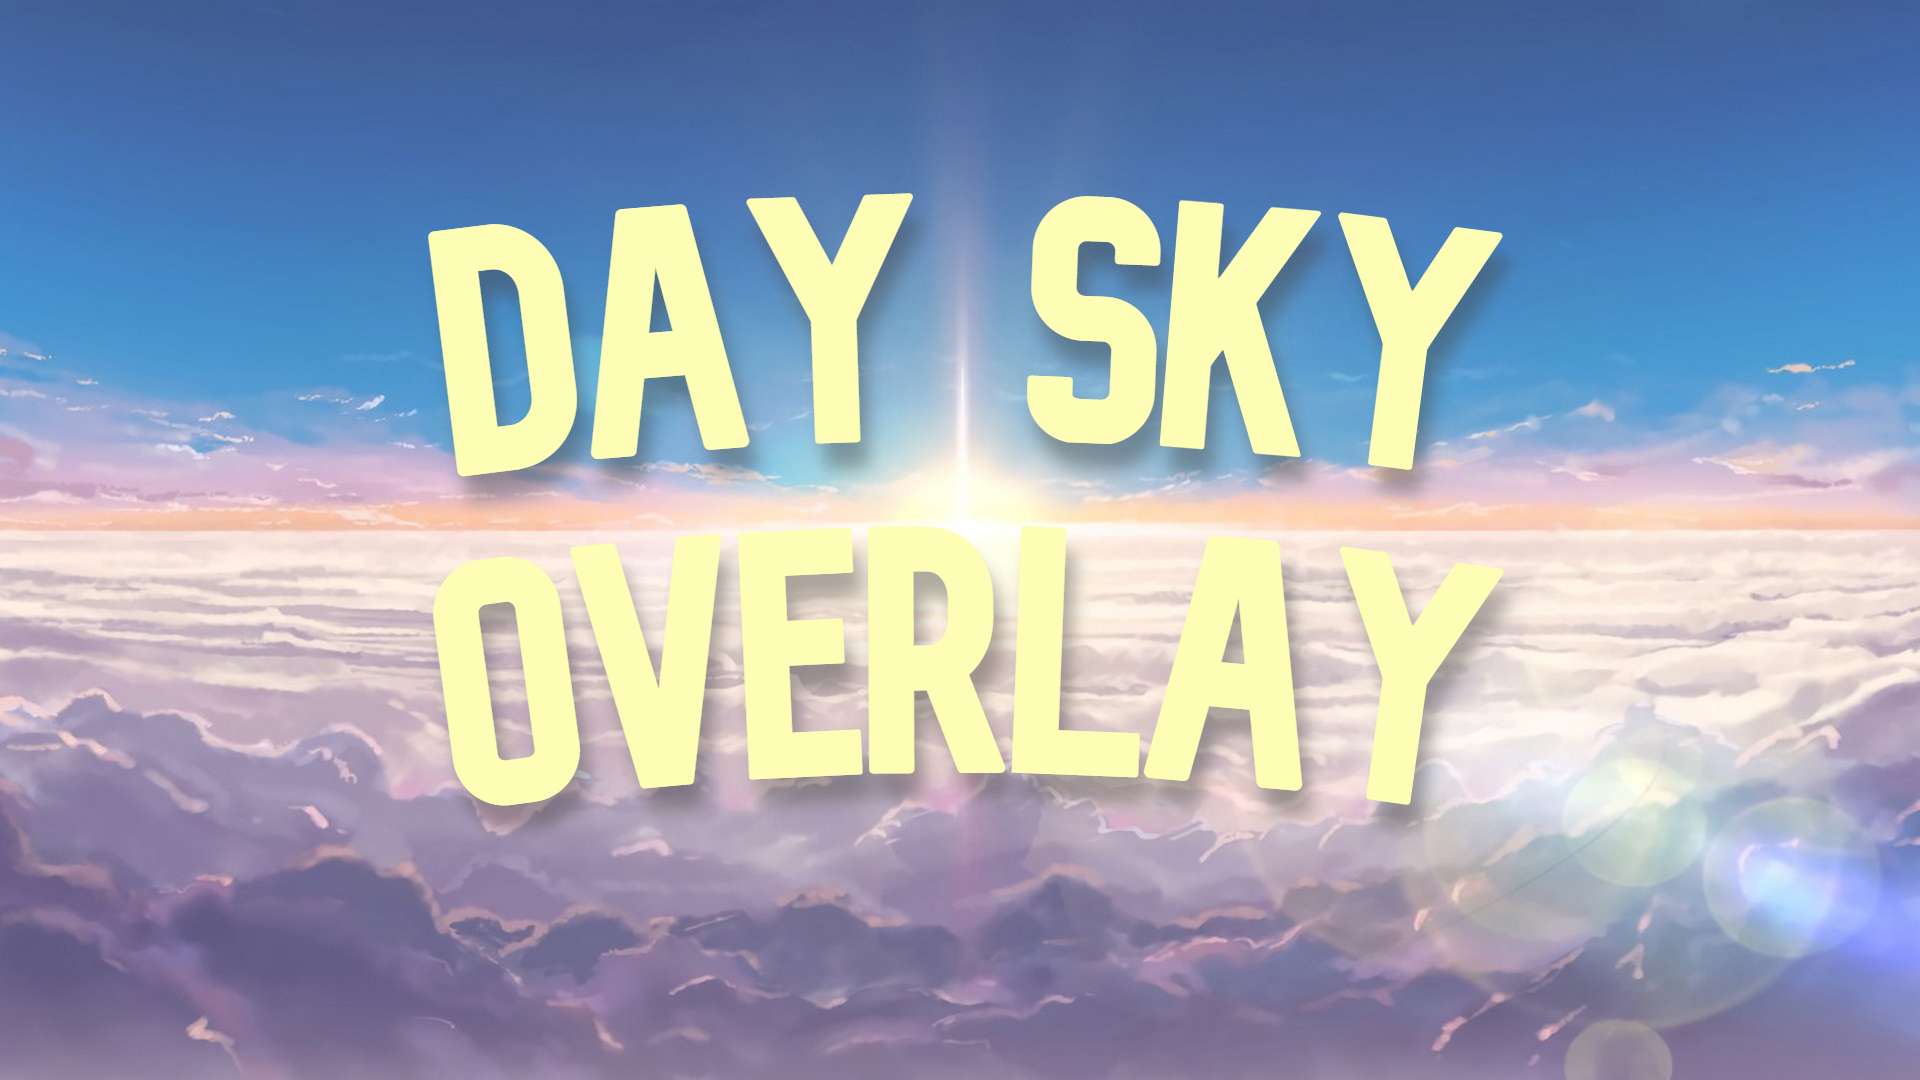 Day Sky Overlay #3 16 by rh56 on PvPRP